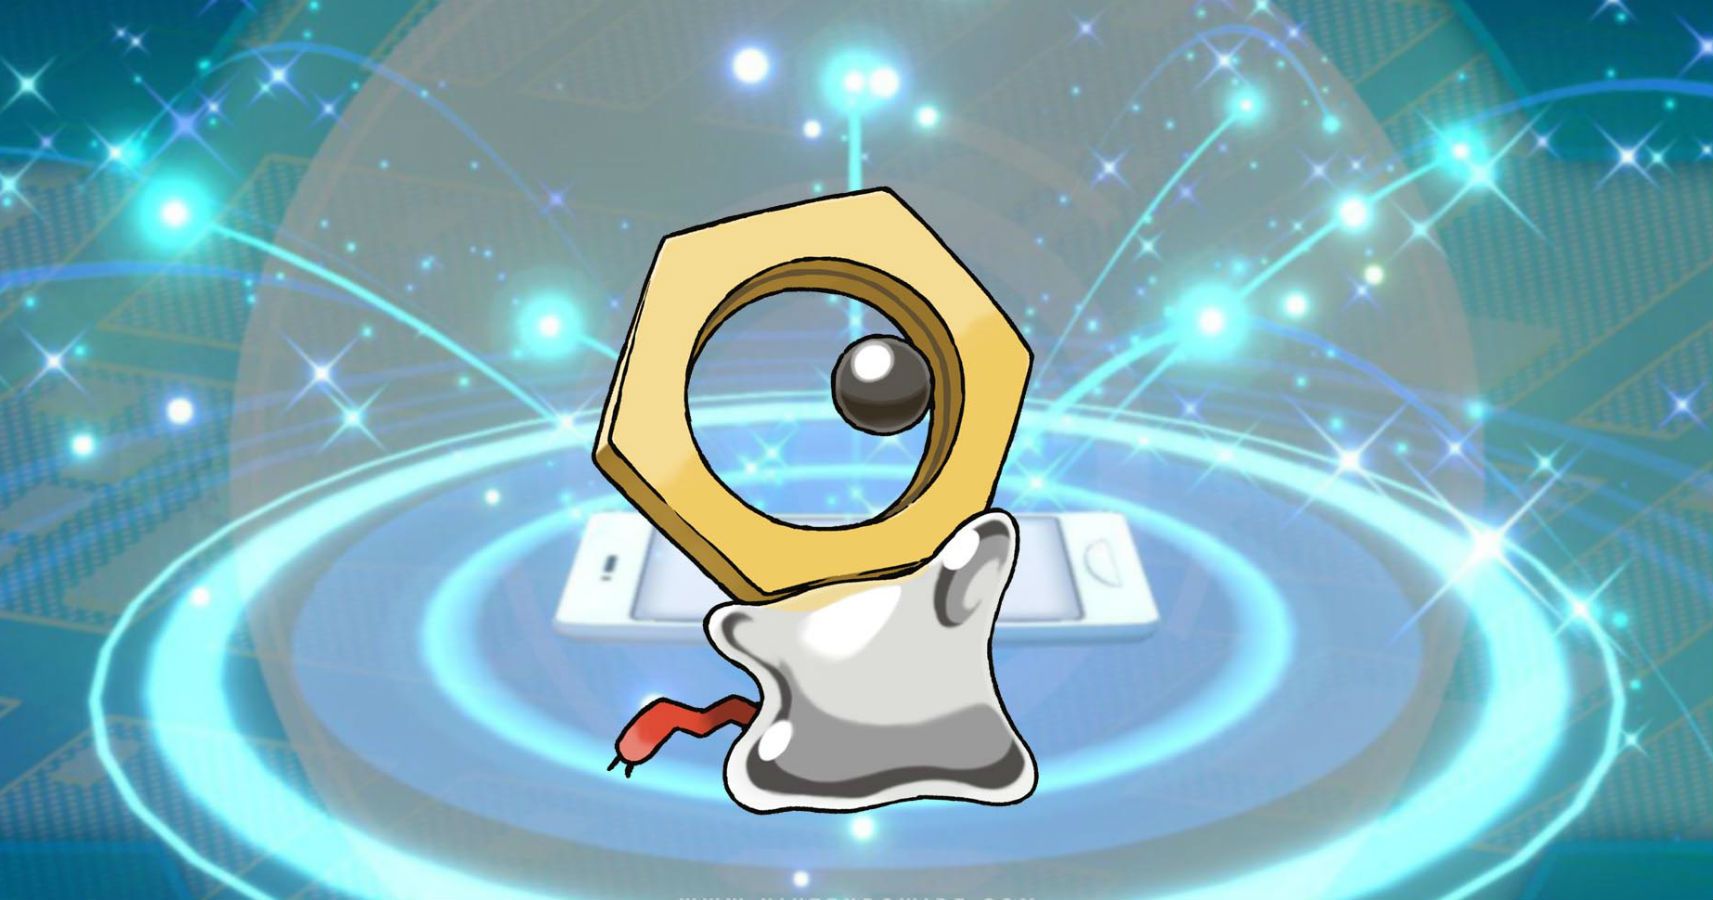 Meltan To Make Its Mysterious Debut In The Pokémon Anime TV Series